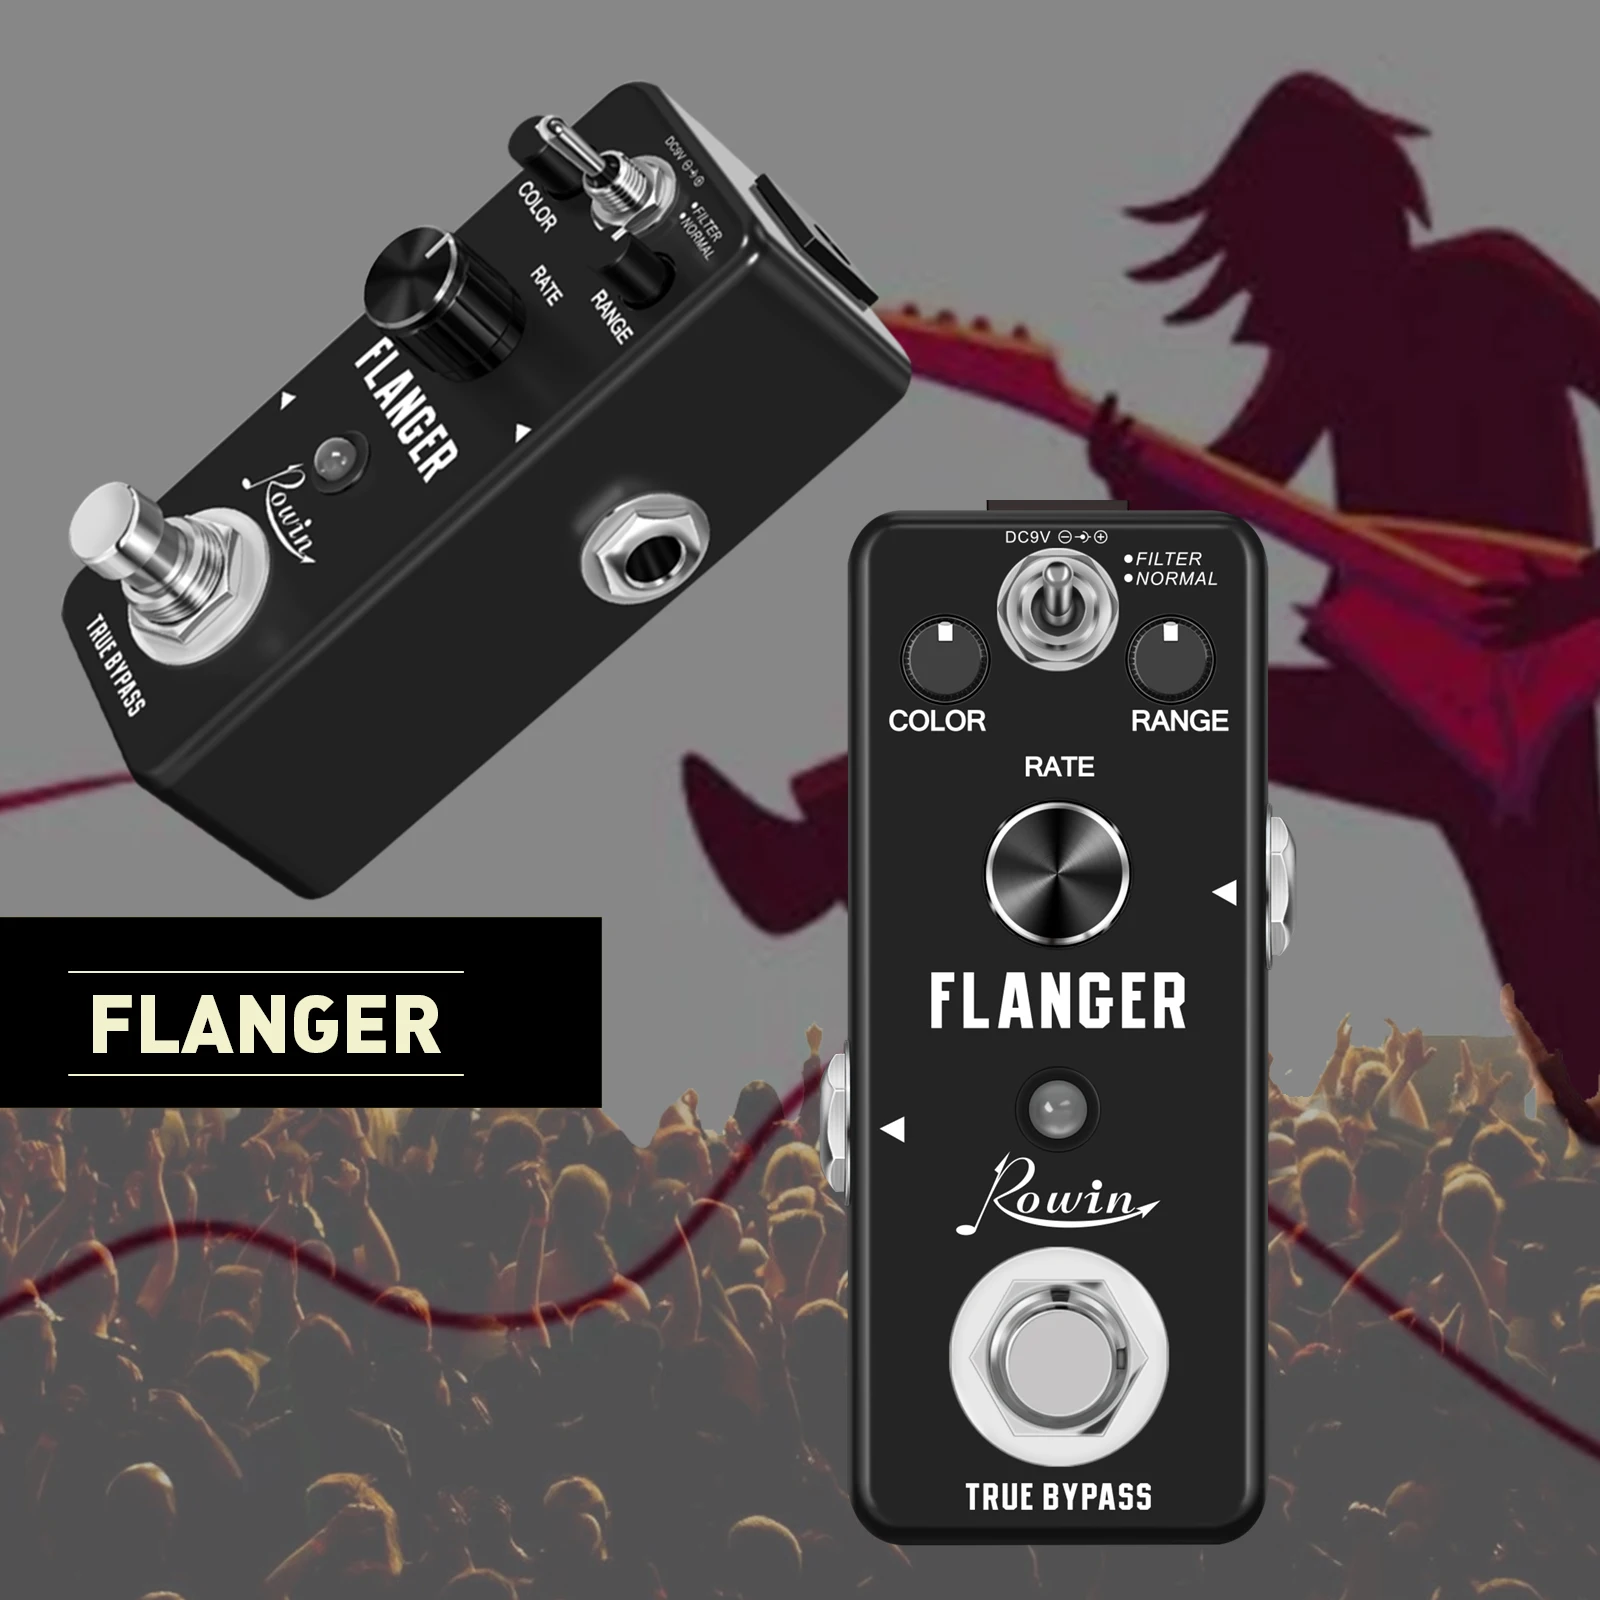 

Rowin LEF-312 Vintage Guitar Flanger Pedal 2 Modes Analog Flanger Static Filter Effect Pedals For Electric Guitar Mini Size